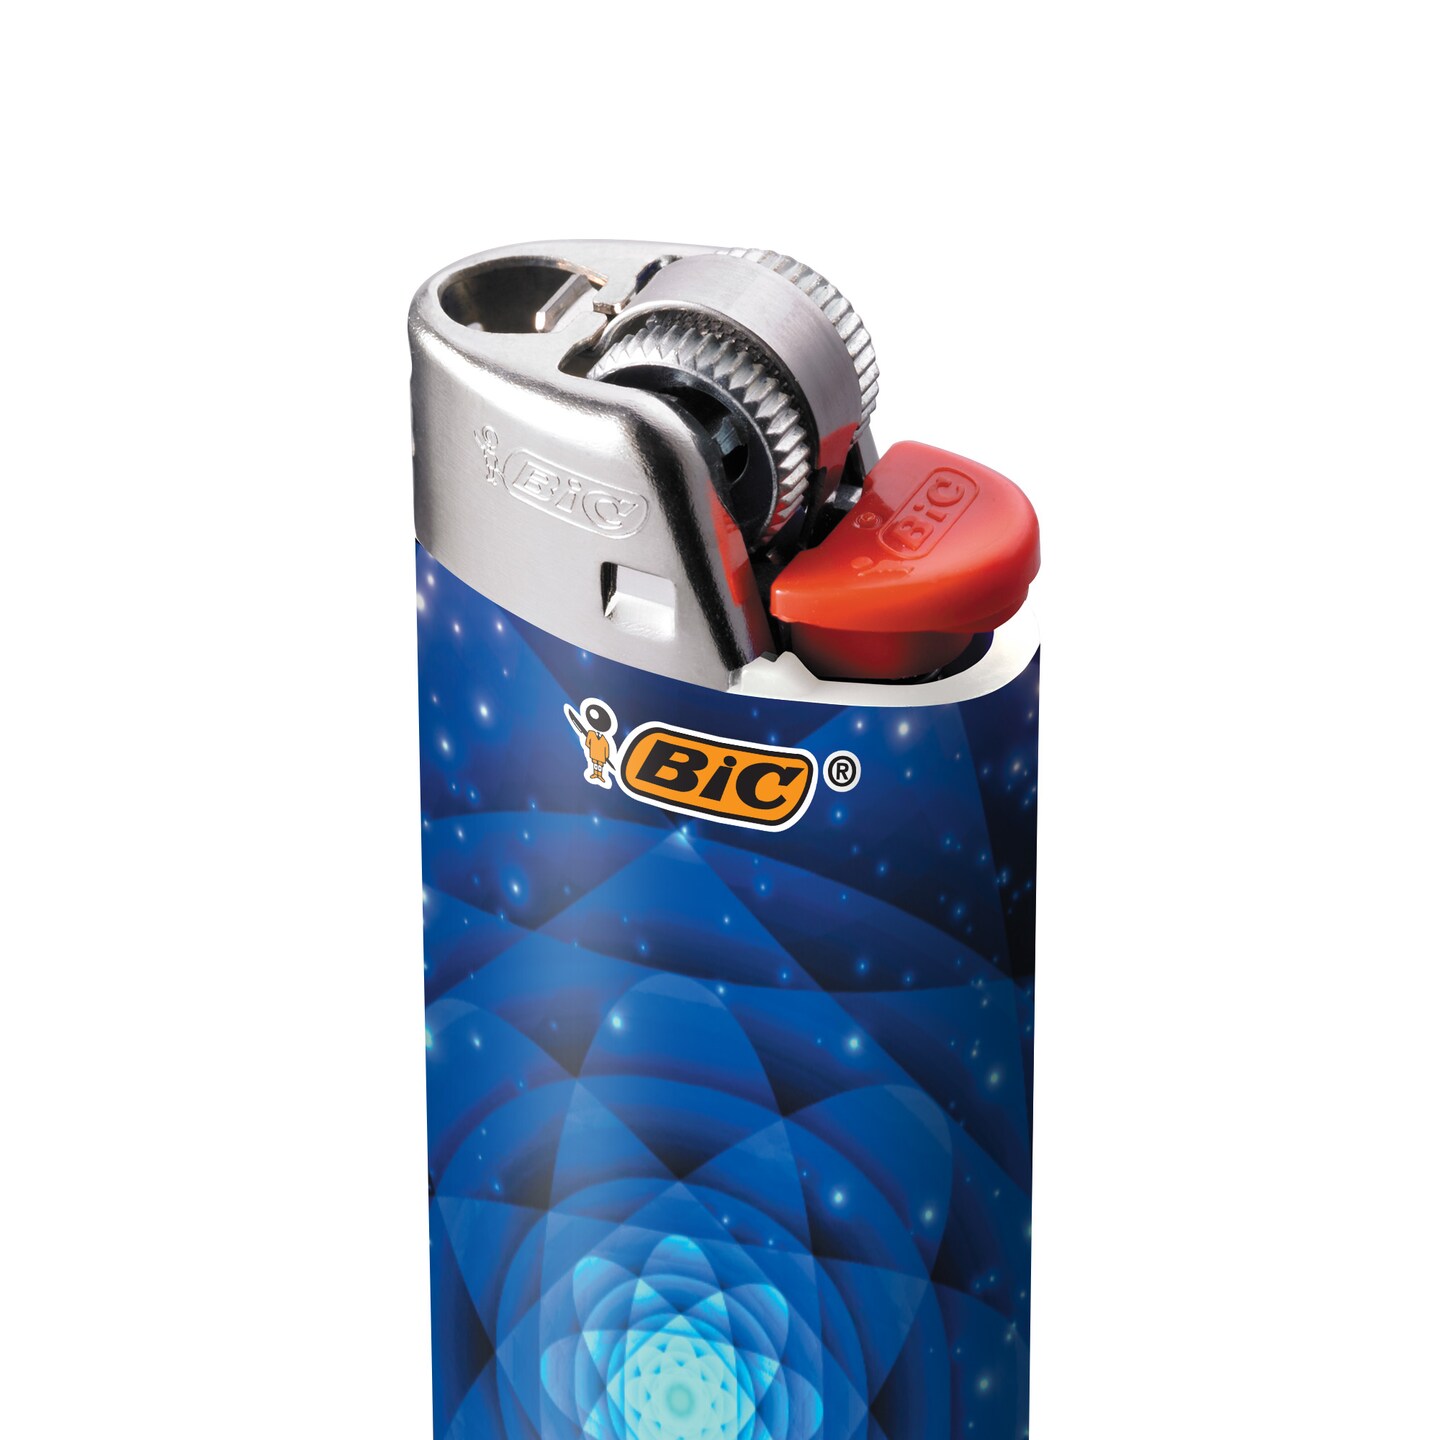 BIC Maxi Pocket Lighter, Special Edition Psychedelic Collection, Assorted Unique Lighter Designs, 50 Count Tray of Lighters